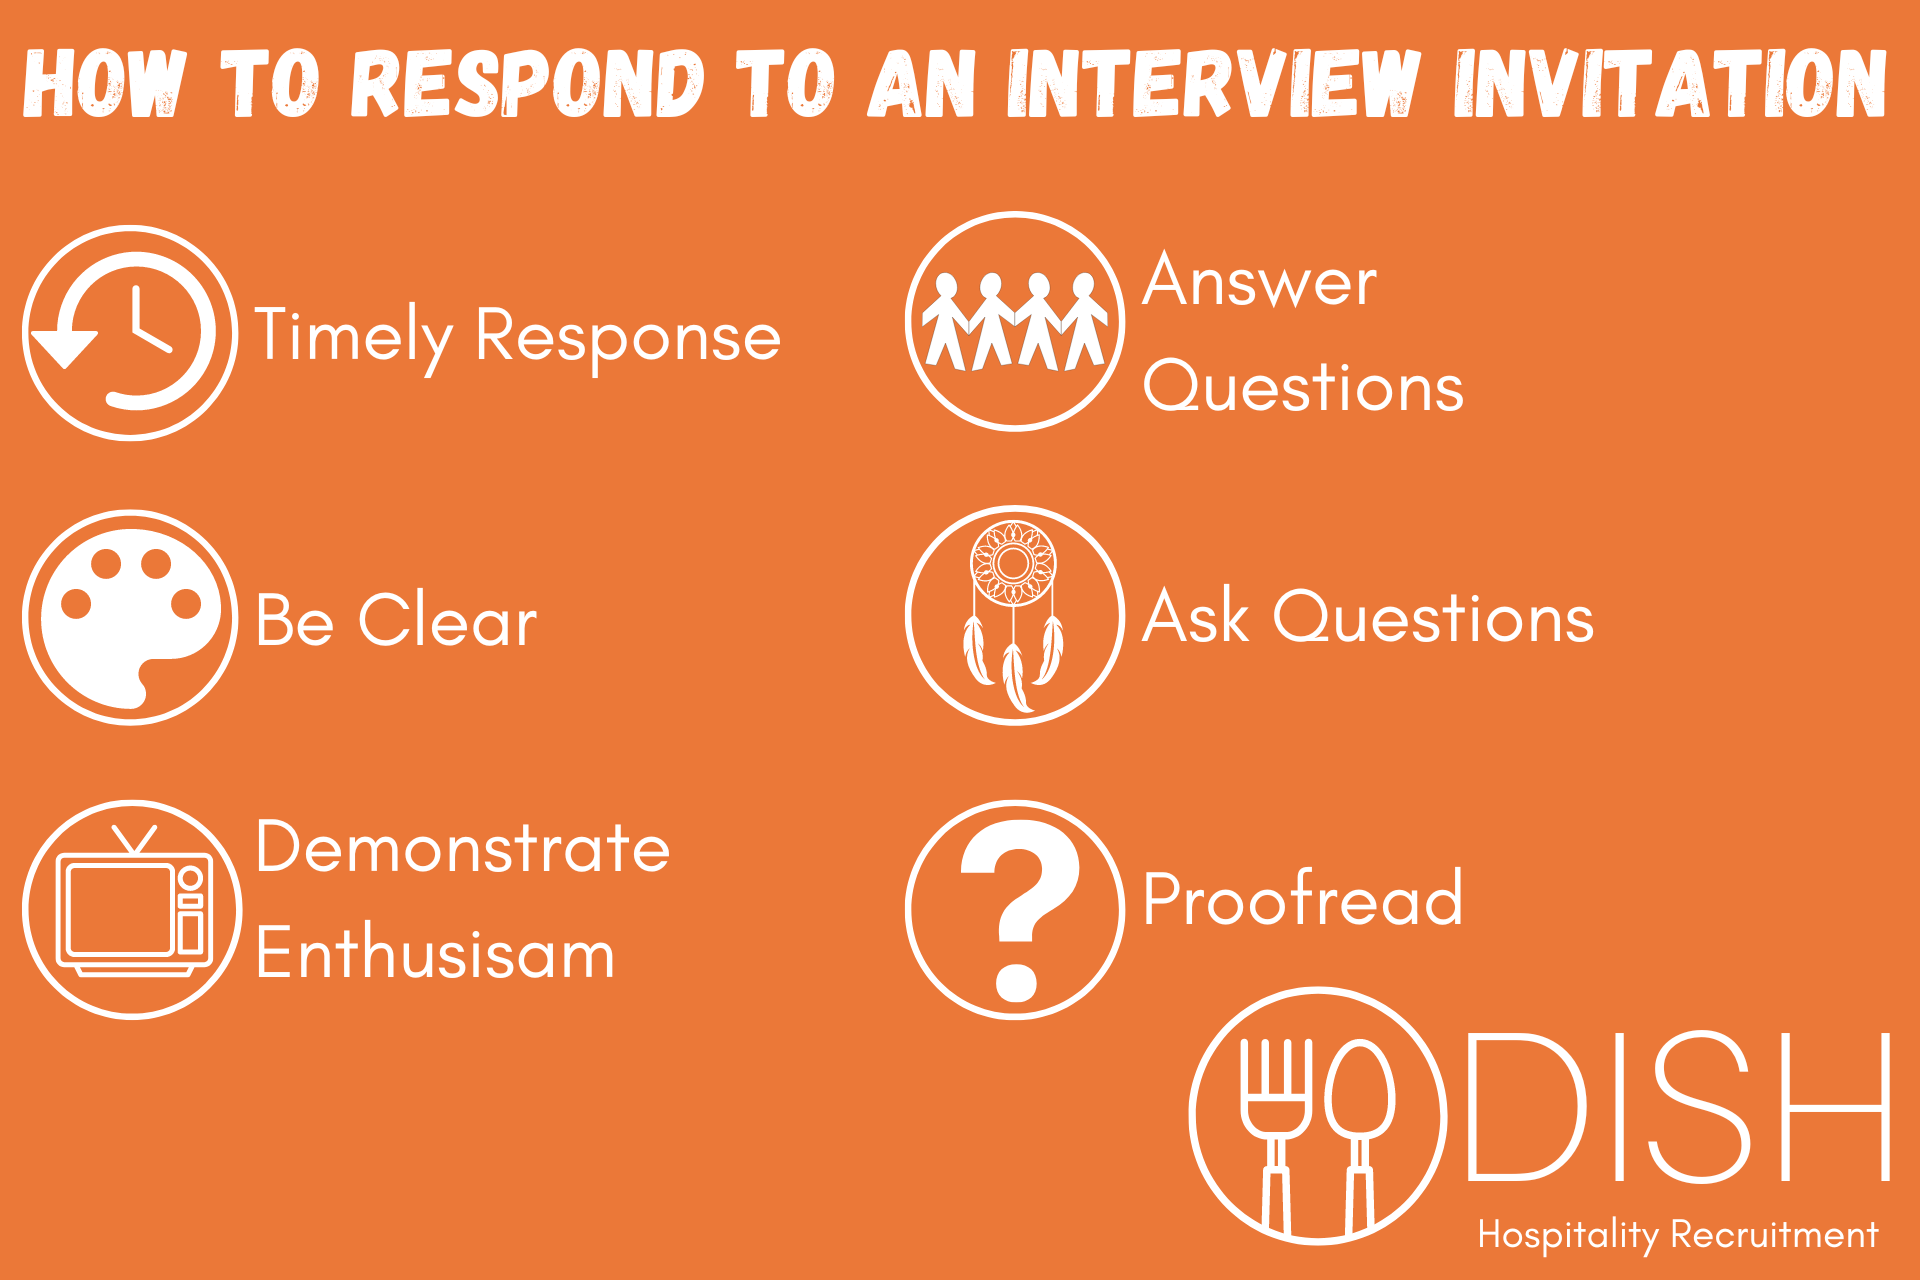 How to Respond to an Interview Invitation